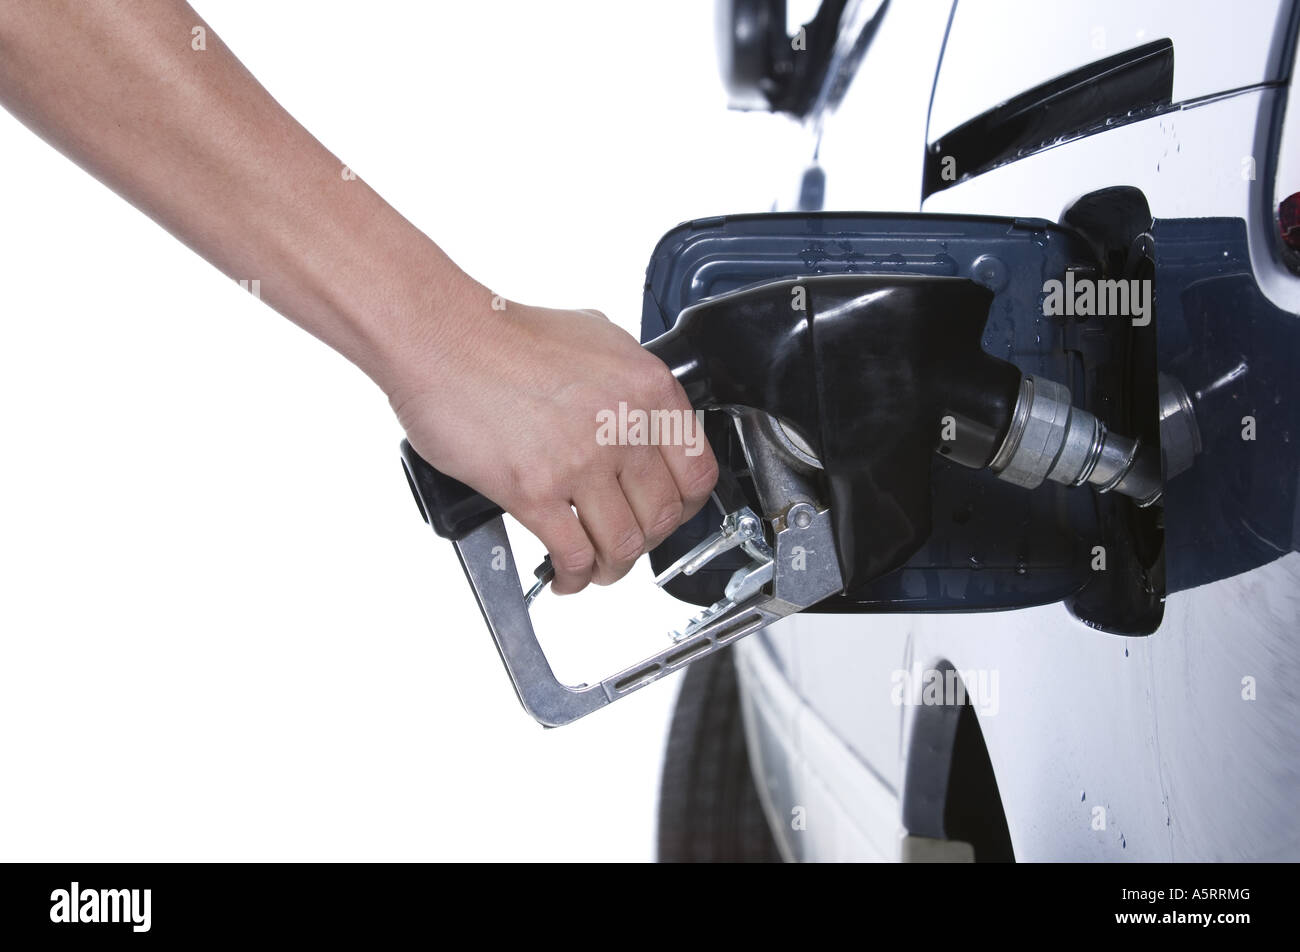 Filling up gas tank Stock Photo